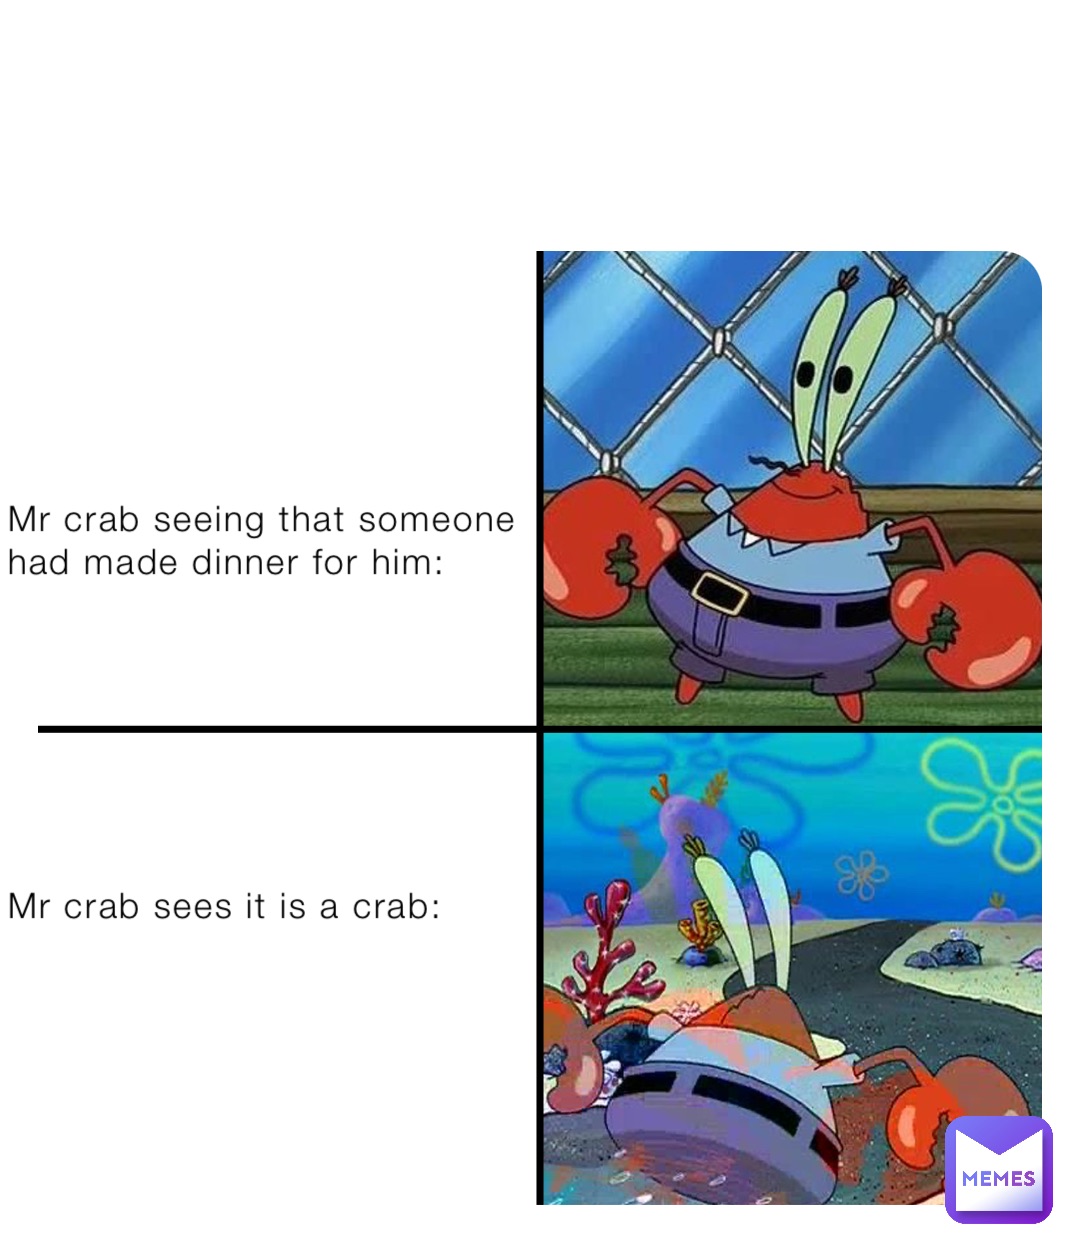 Mr crab seeing that someone had made dinner for him:







Mr crab sees it is a crab: